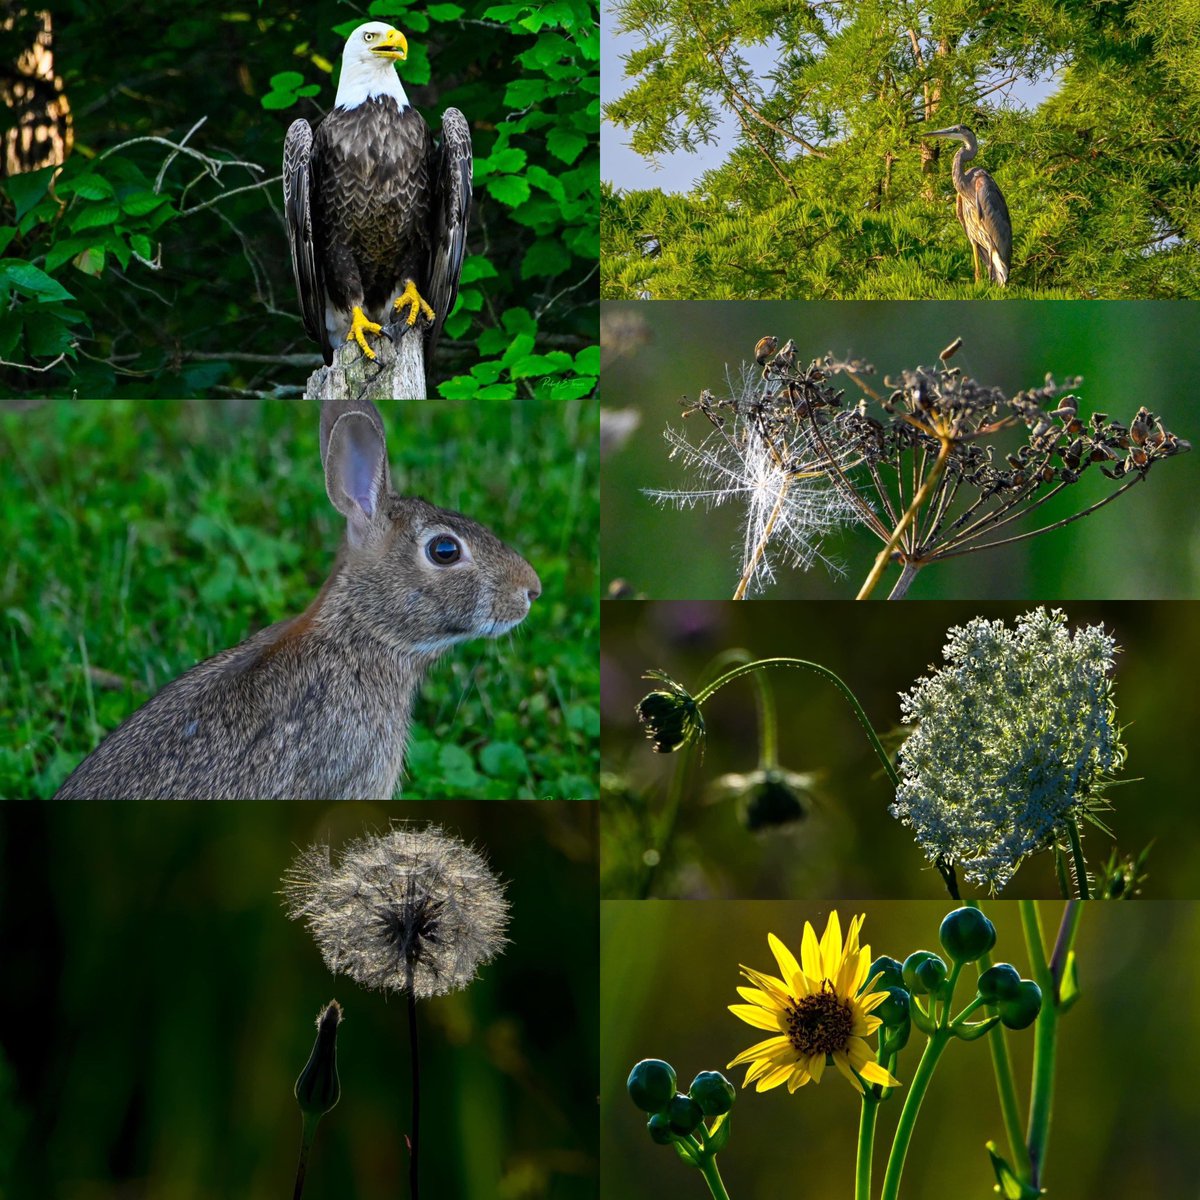 We would like to thank Bob Turner for capturing these wonderful nature pictures here from Marion County. #marioncountyparkdistrict #birdsofohio #nativeplants #ohiobirds #ohiobird #ohiobirding #ohiobirdnerds #ohiobirdwatching #ohiowildlife #ohionaturelovers #ohionature #MarionMade